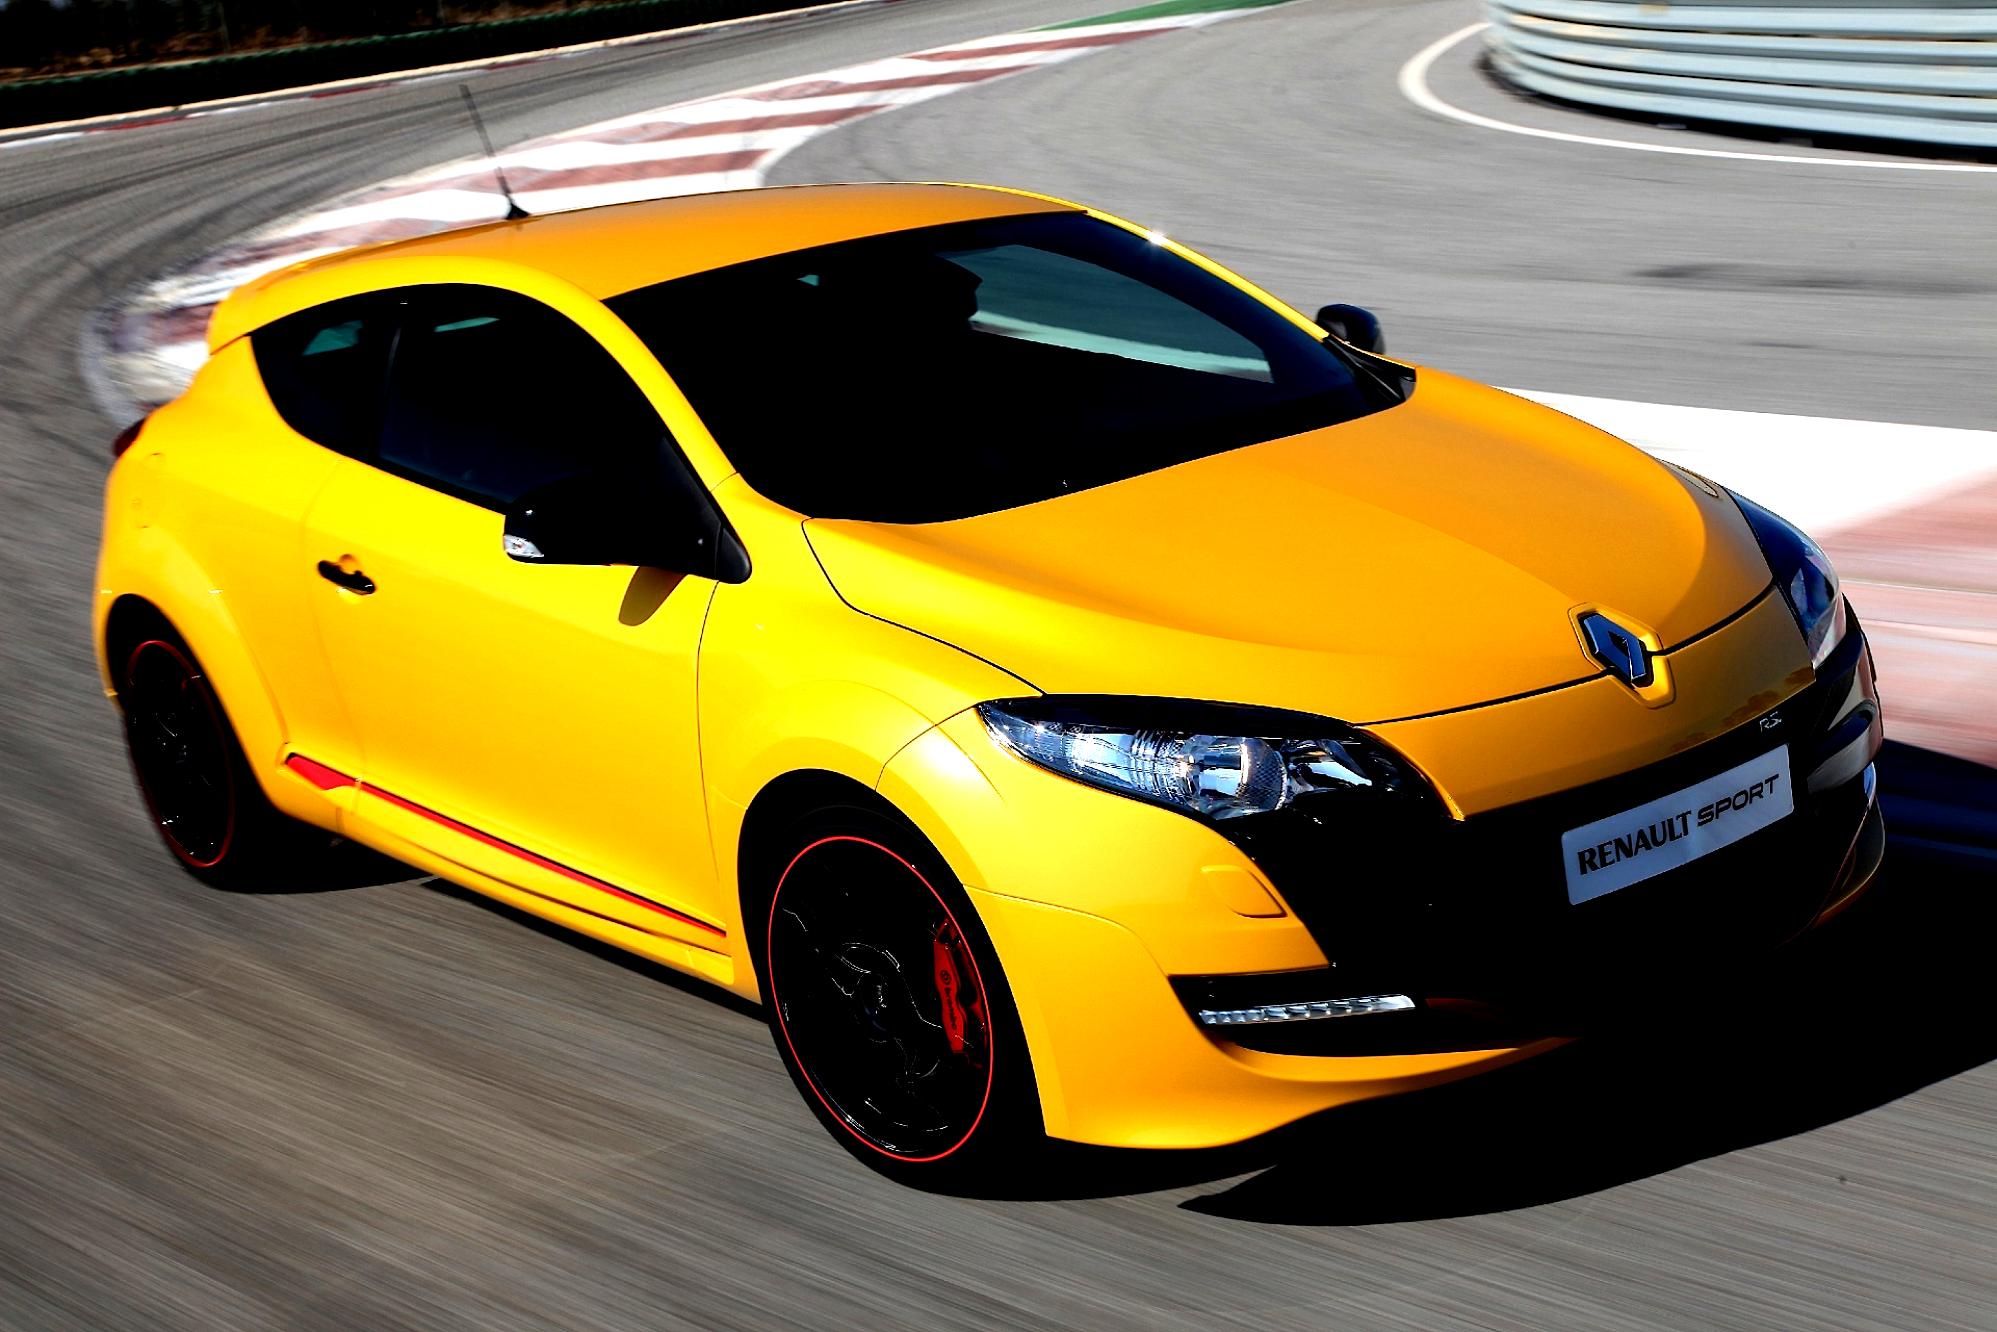 Renault Megane RS Coupe 2009 #61